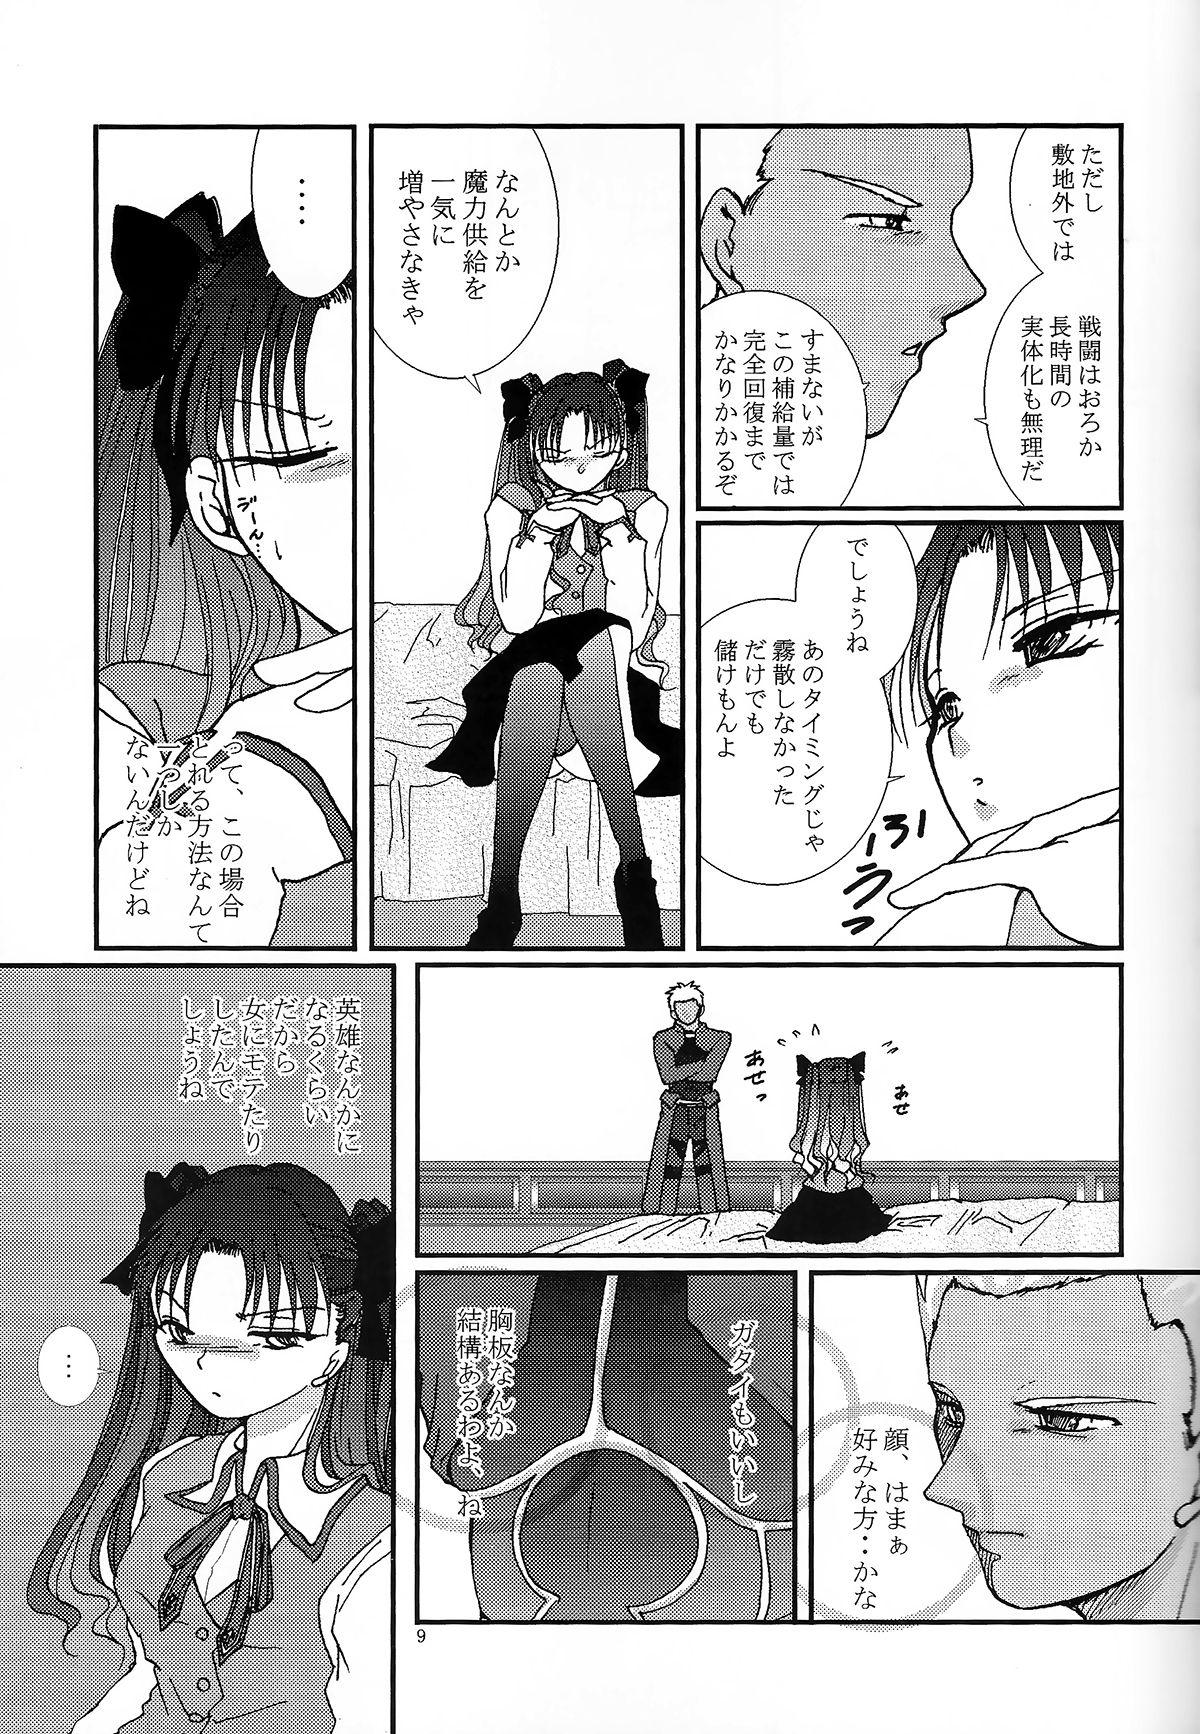 Arab Question-7 - Fate stay night Bubble Butt - Page 7